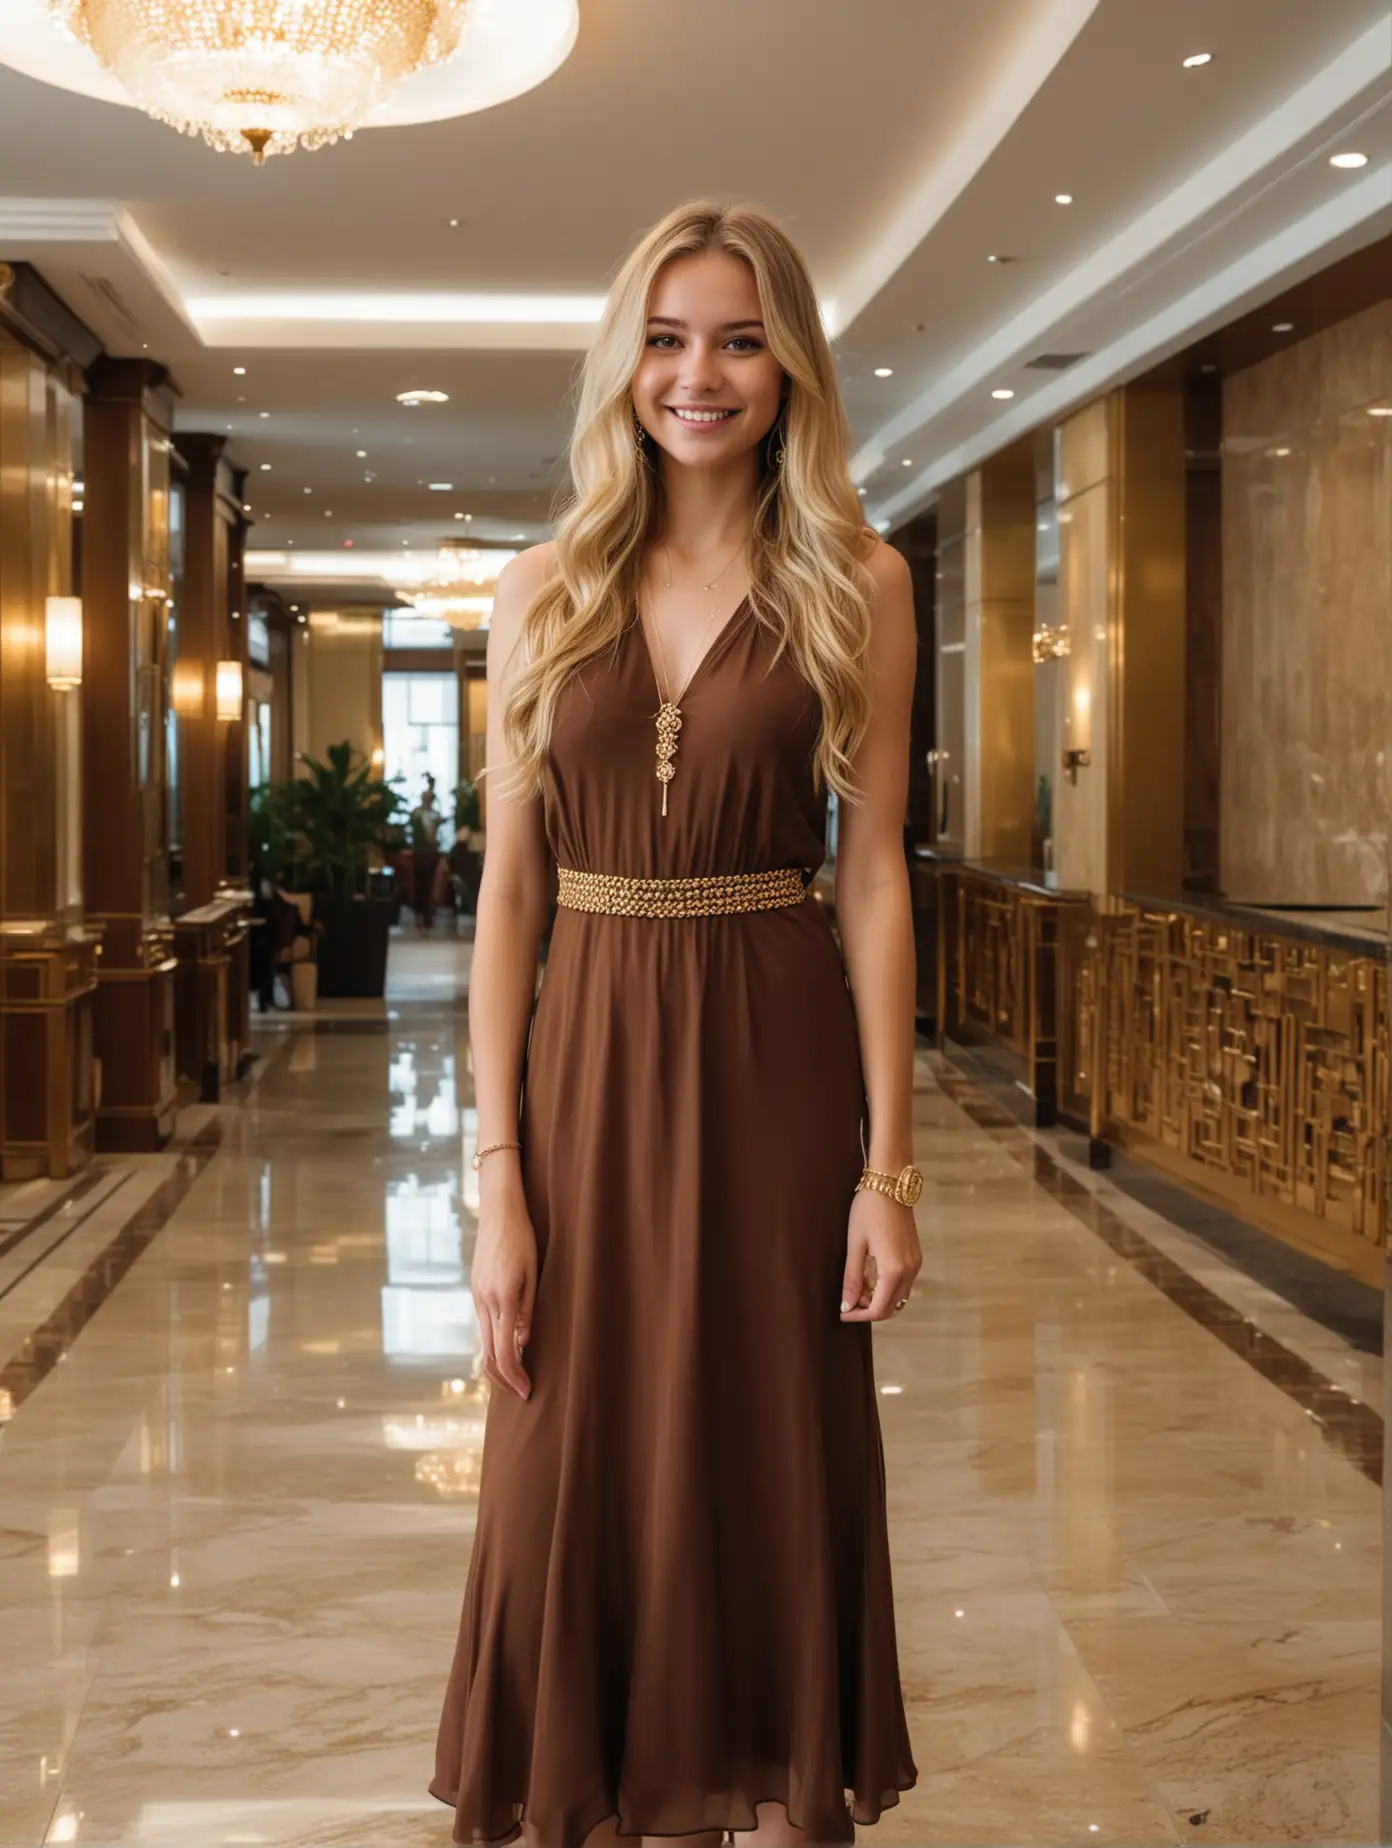 Confident Smiling Blonde Woman in Elegant Dress at Hong Kong Hotel Lobby